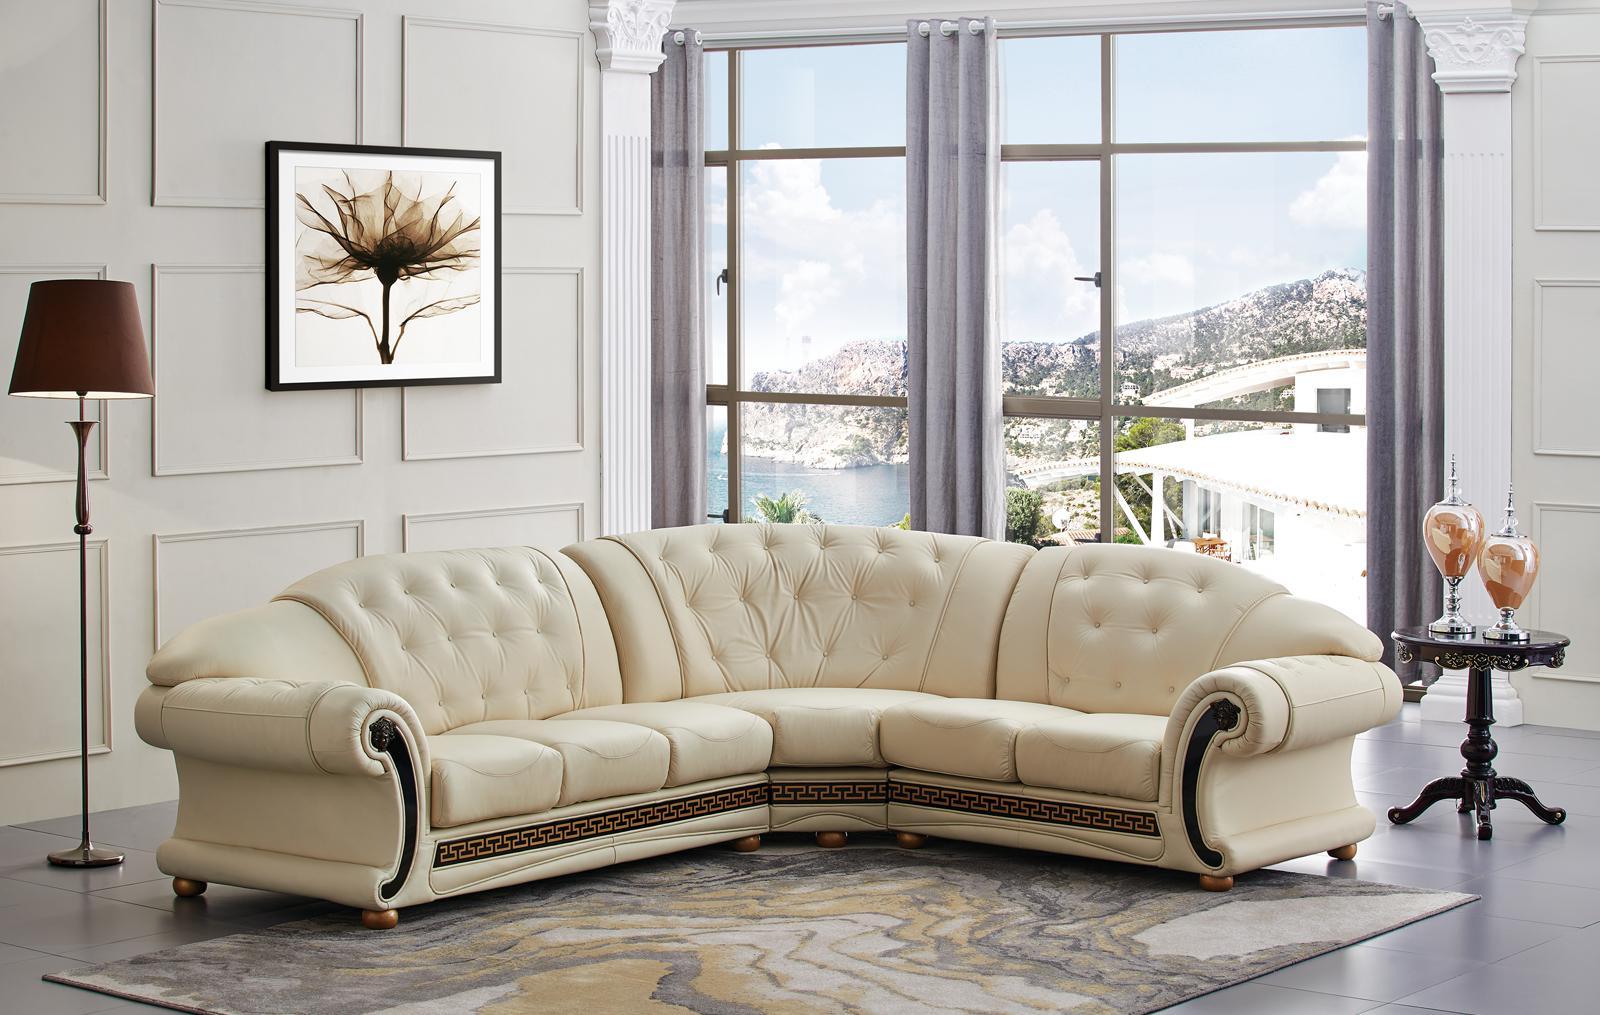 

    
Ivory Genuine Leather Tufted Sectional Sofa Anais 82.3 Right Hand Facing Classic
